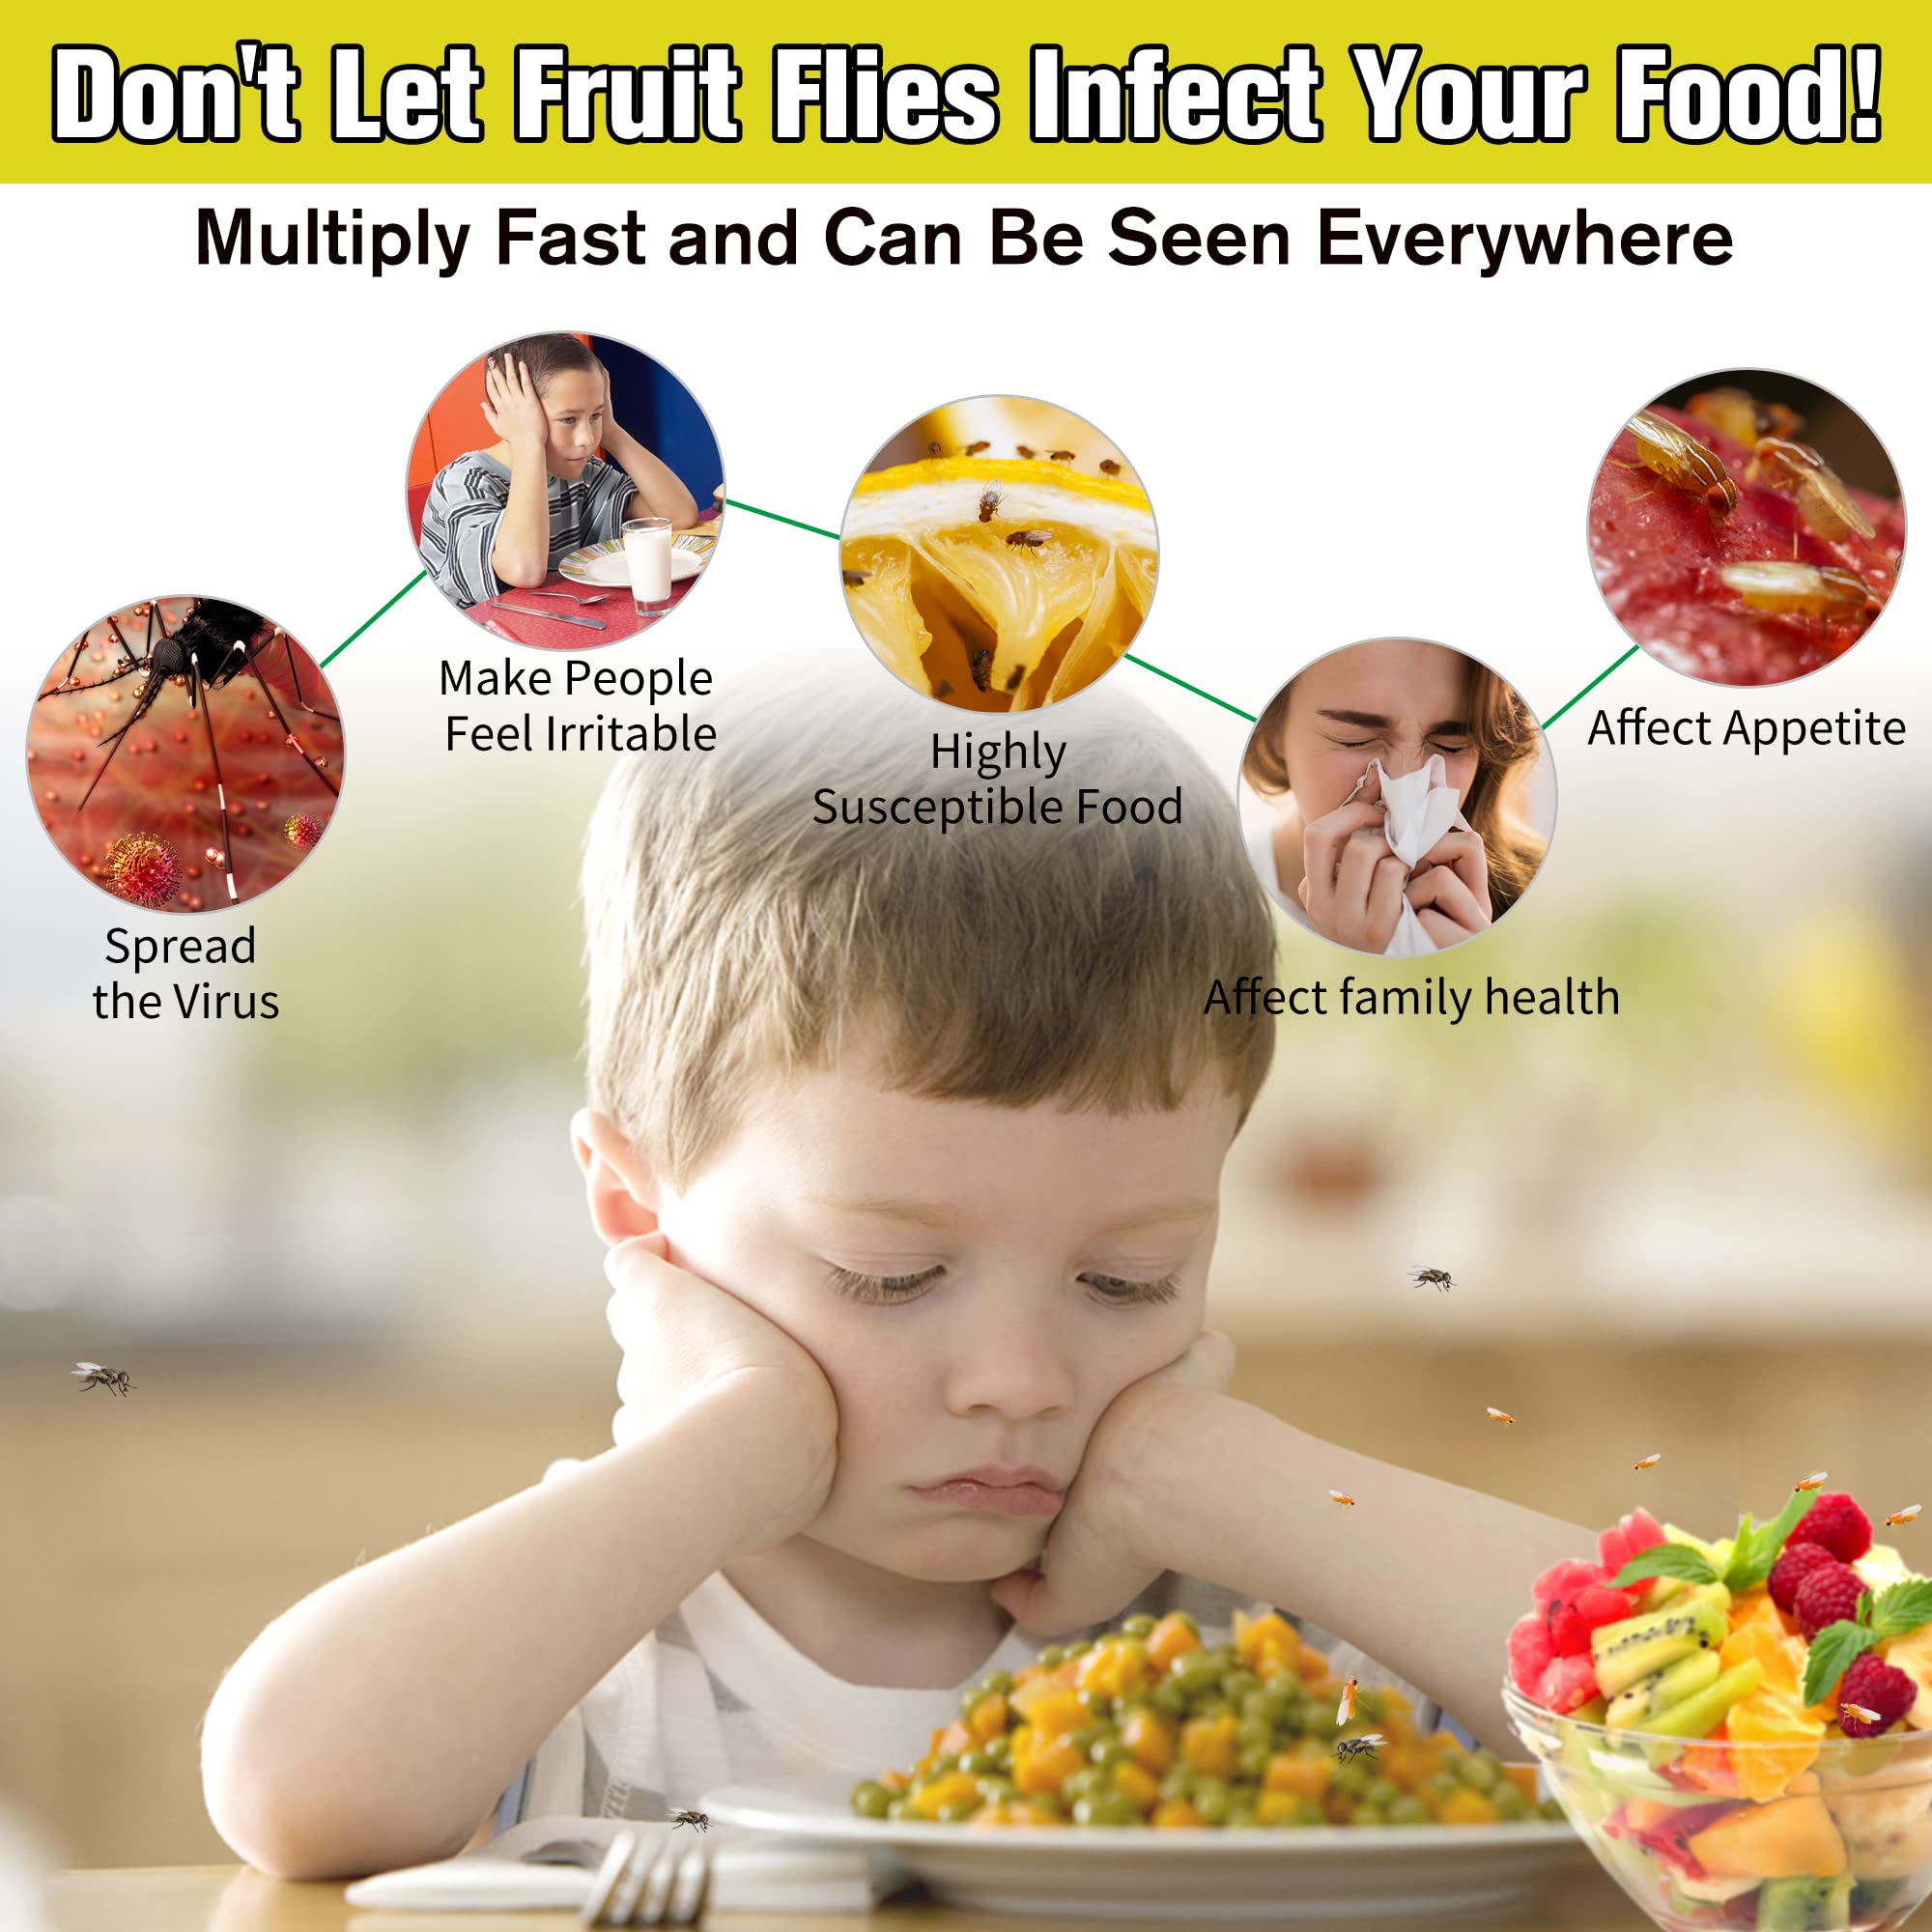 Fly Trap for Indoors, Fruit Fly Trap with Yellow Double Side Sticker, Fruit Fly Killer, Non-Toxic Fly Catcher Gnats Trap Comes with Fruit Fly Attractants for Home/Plant/Kitchen